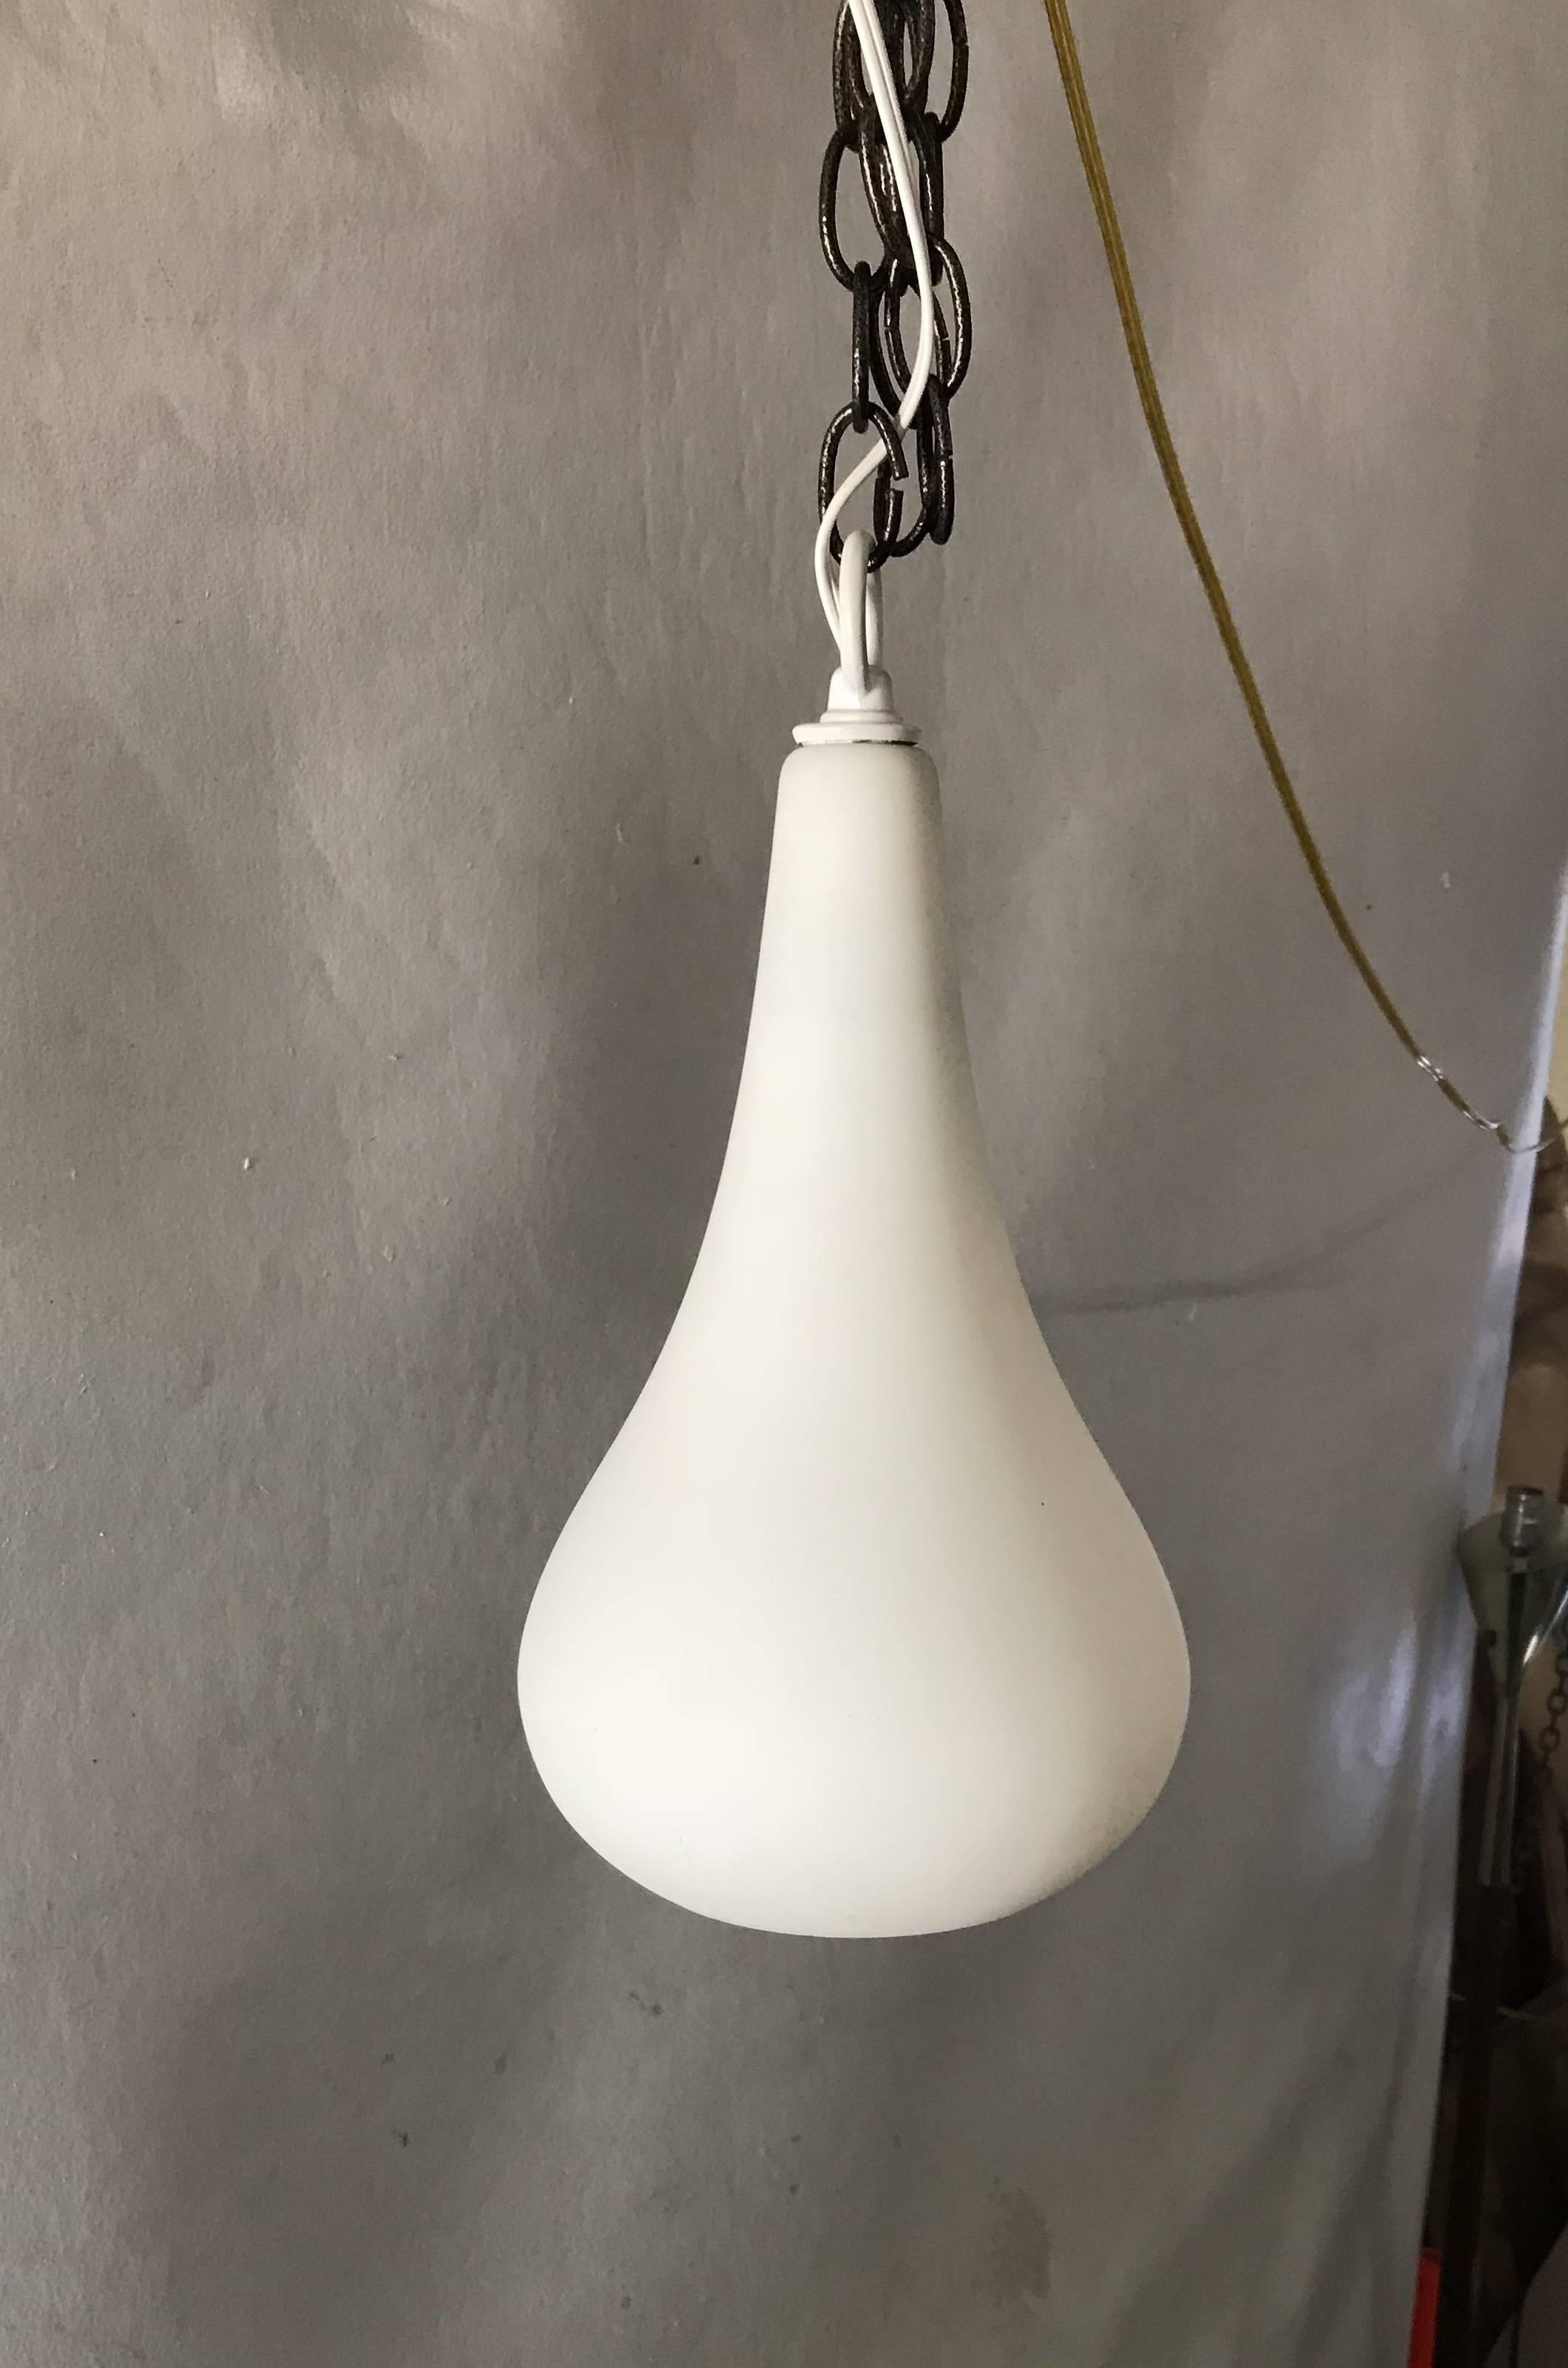 Midcentury teardrop pendant light with a frosted glass shade. Opening at the bottom so that you can change the lightbulb. Measures about 6.0